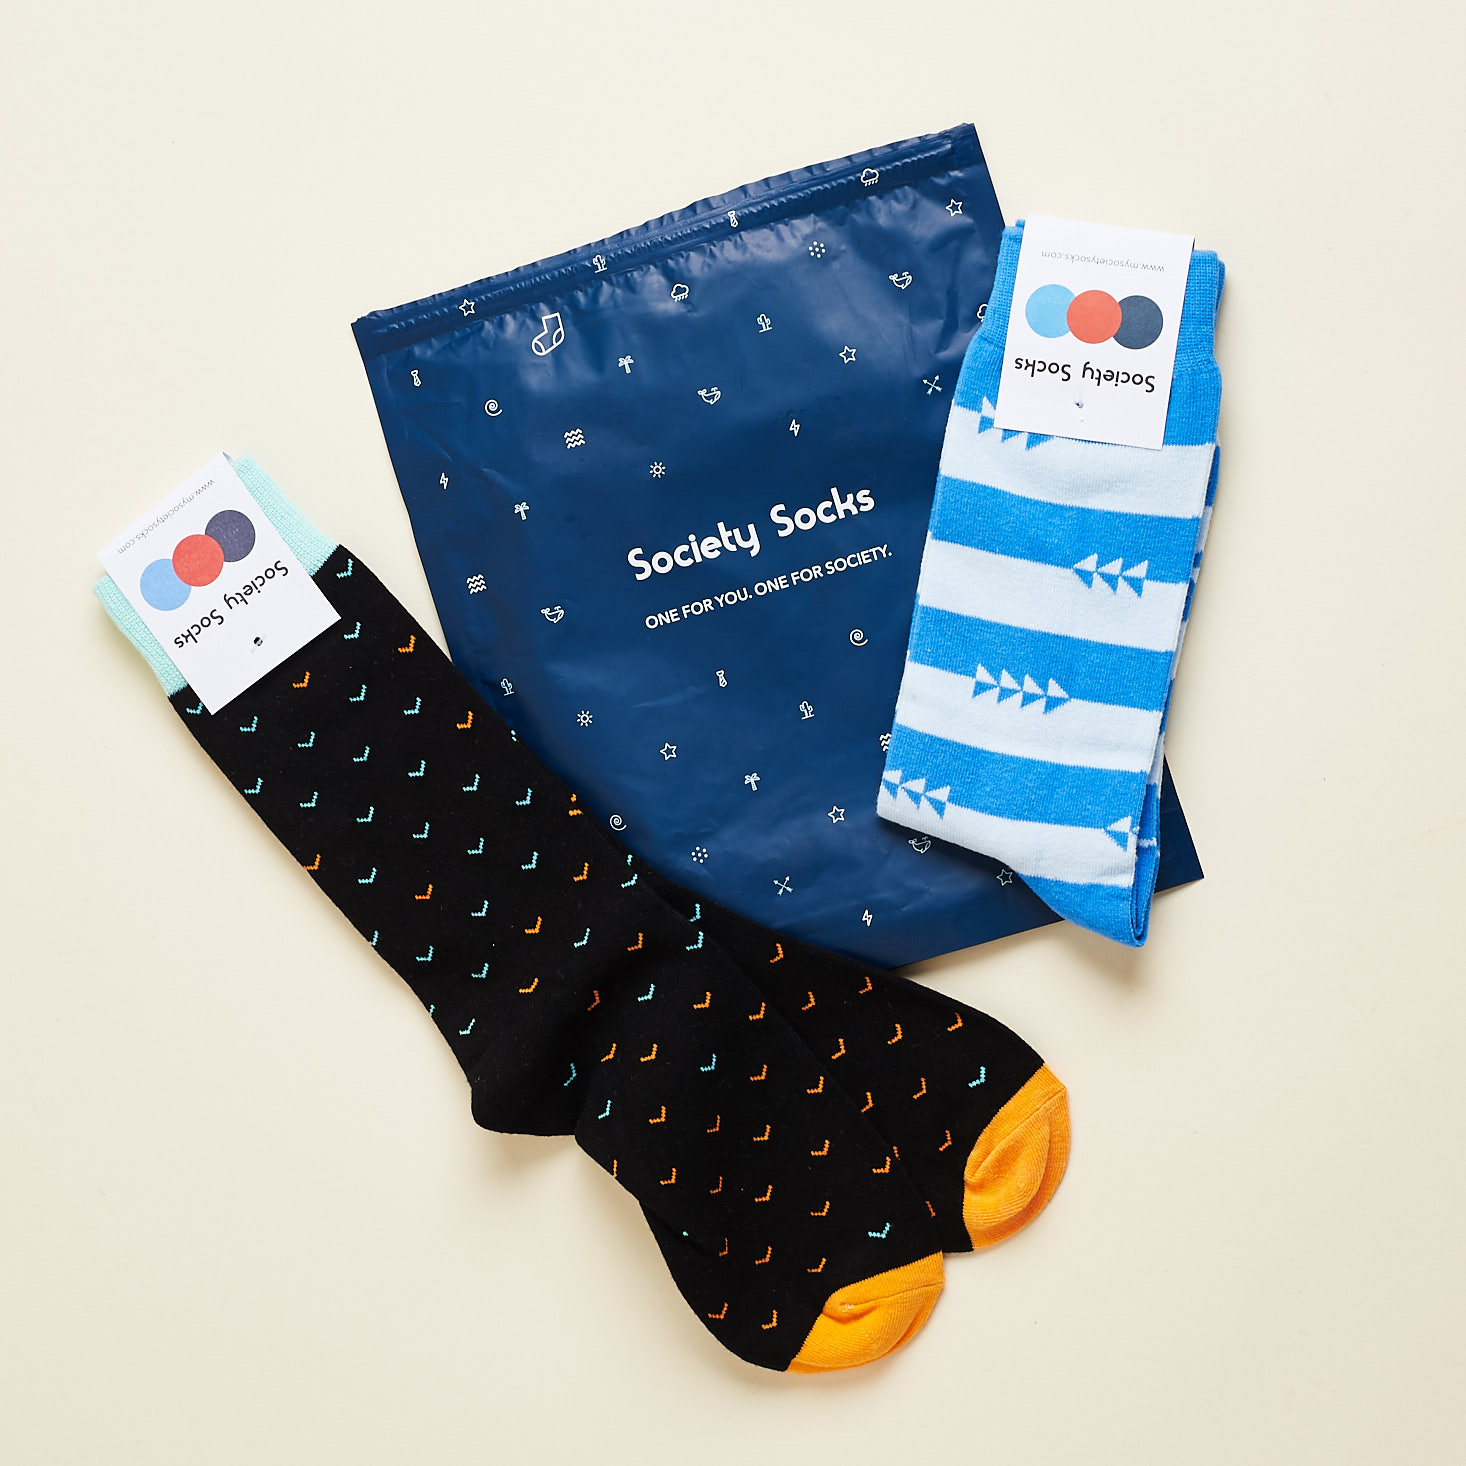 Society Socks Subscription Box Review + 50% Off Coupon – August 2018